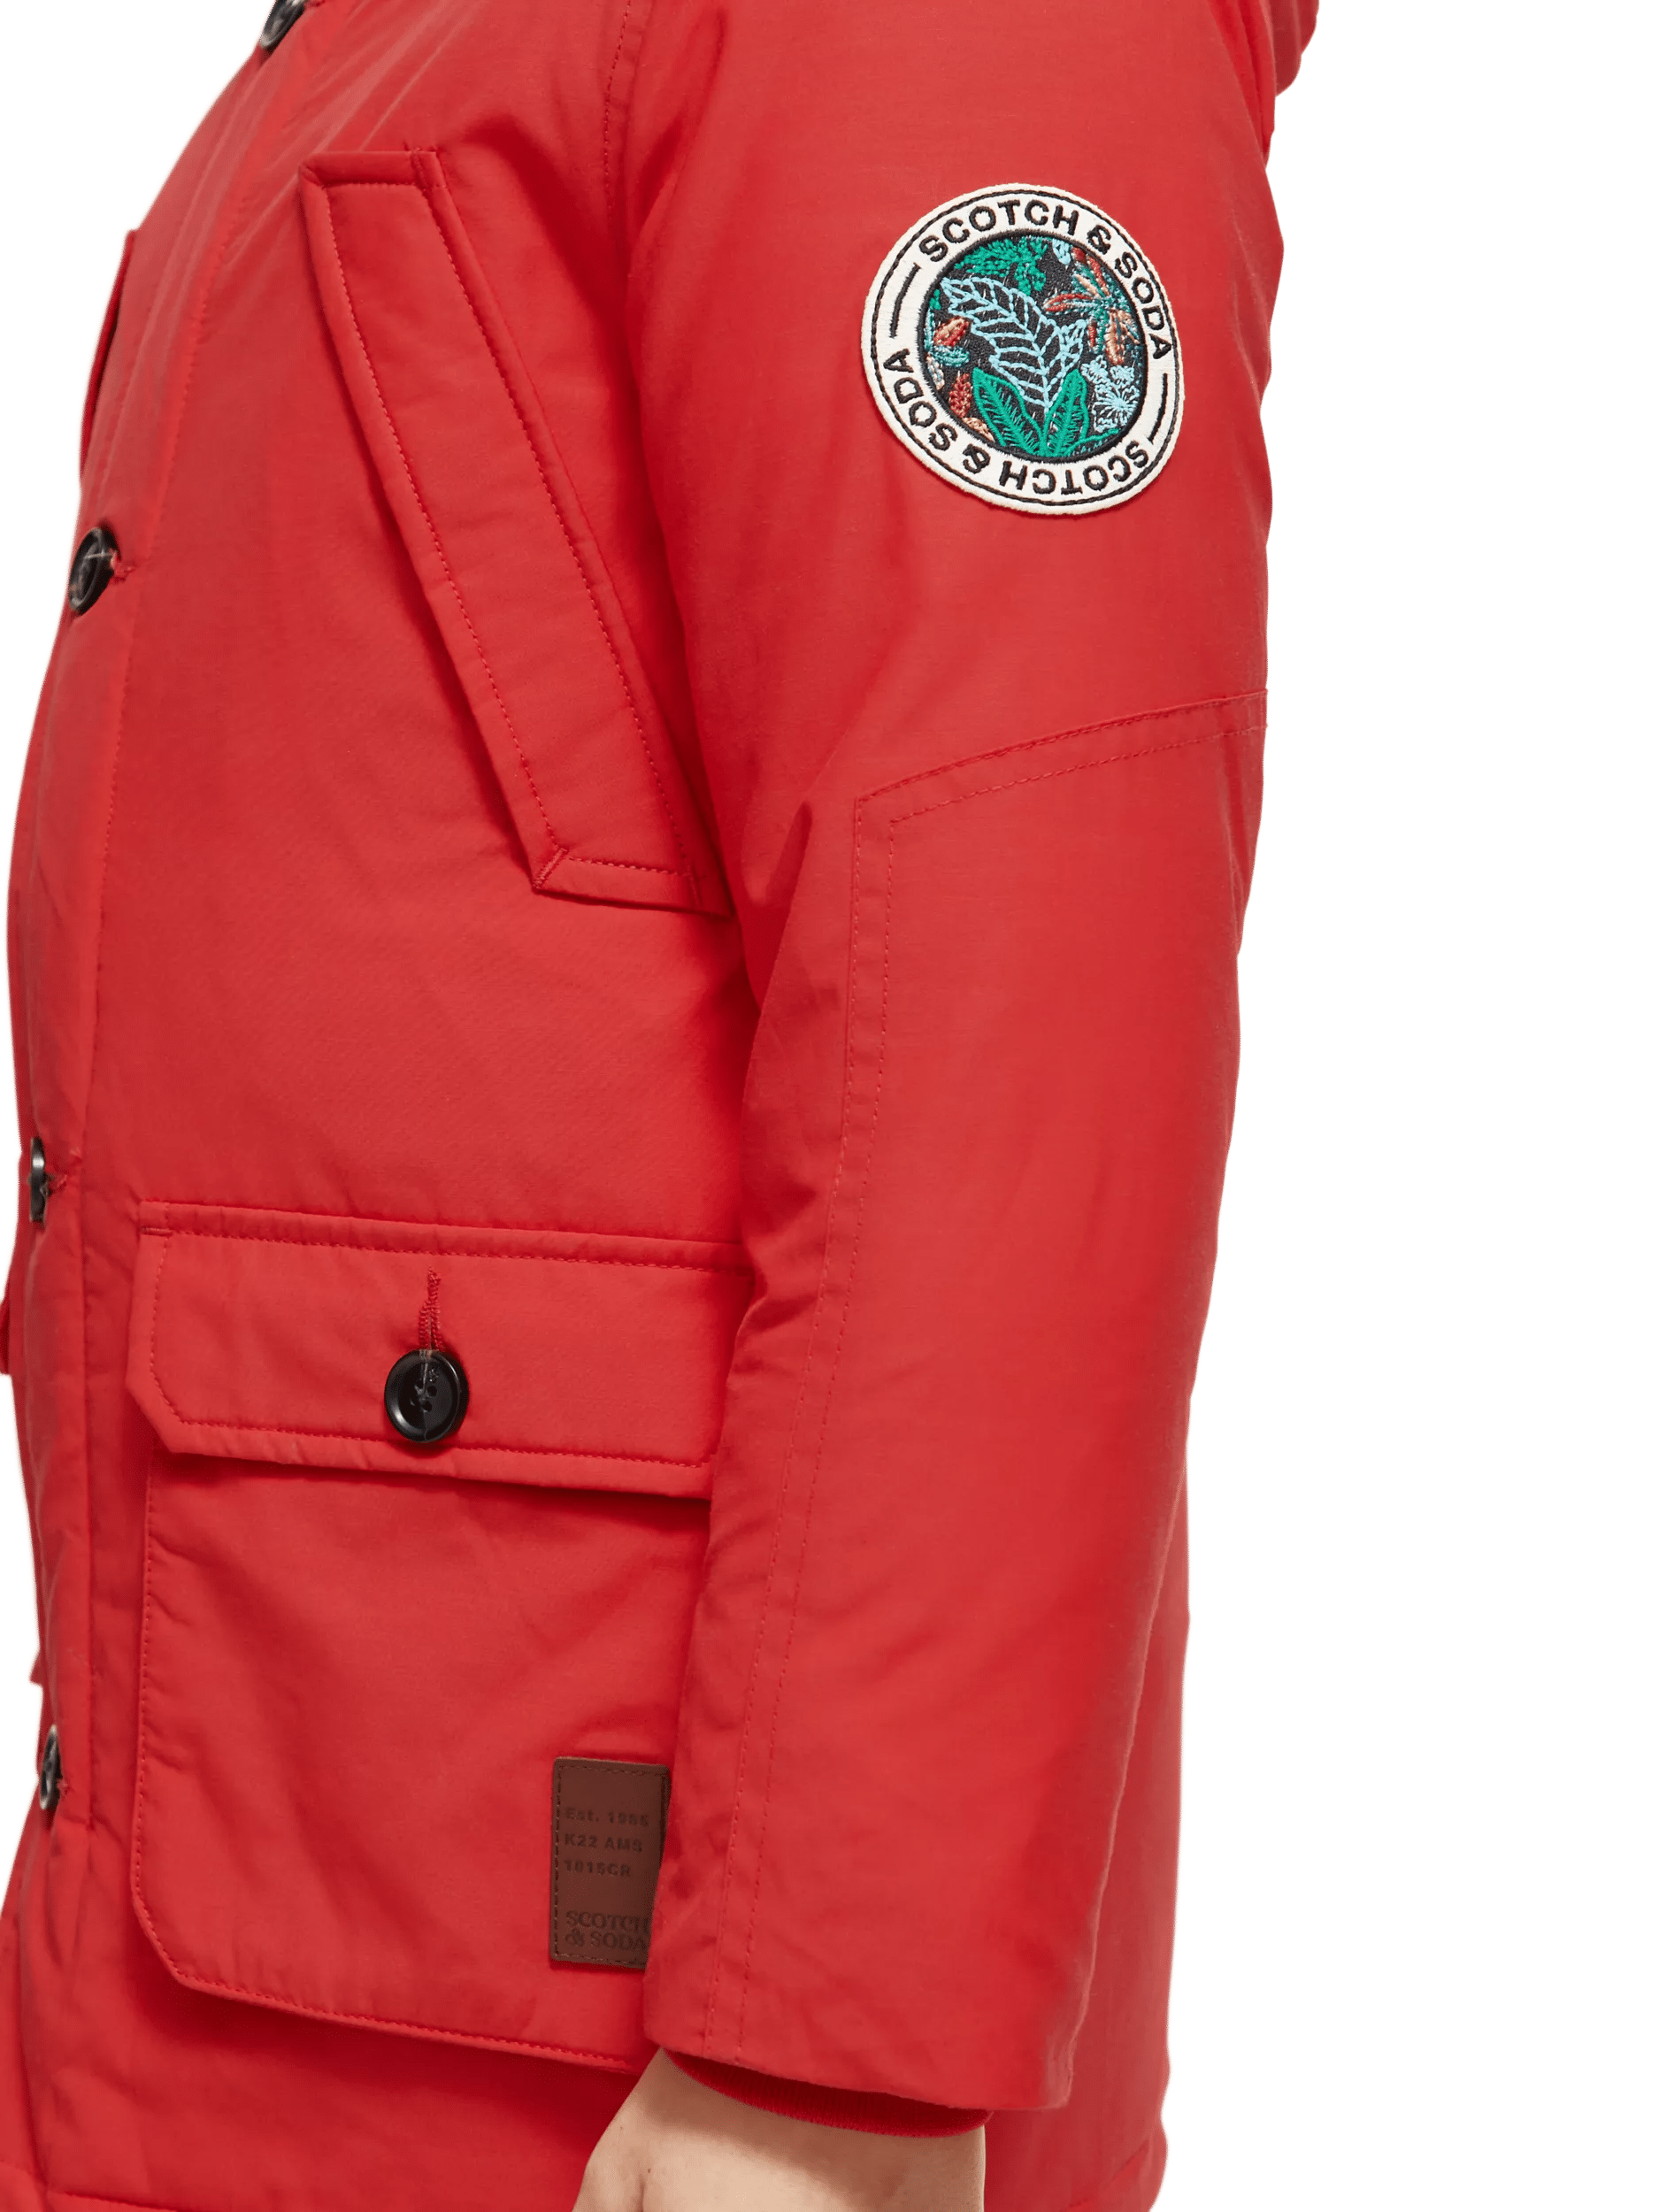 Scotch & Soda Longer length water repellent jacket with Repreve� filling MDL-DTL1